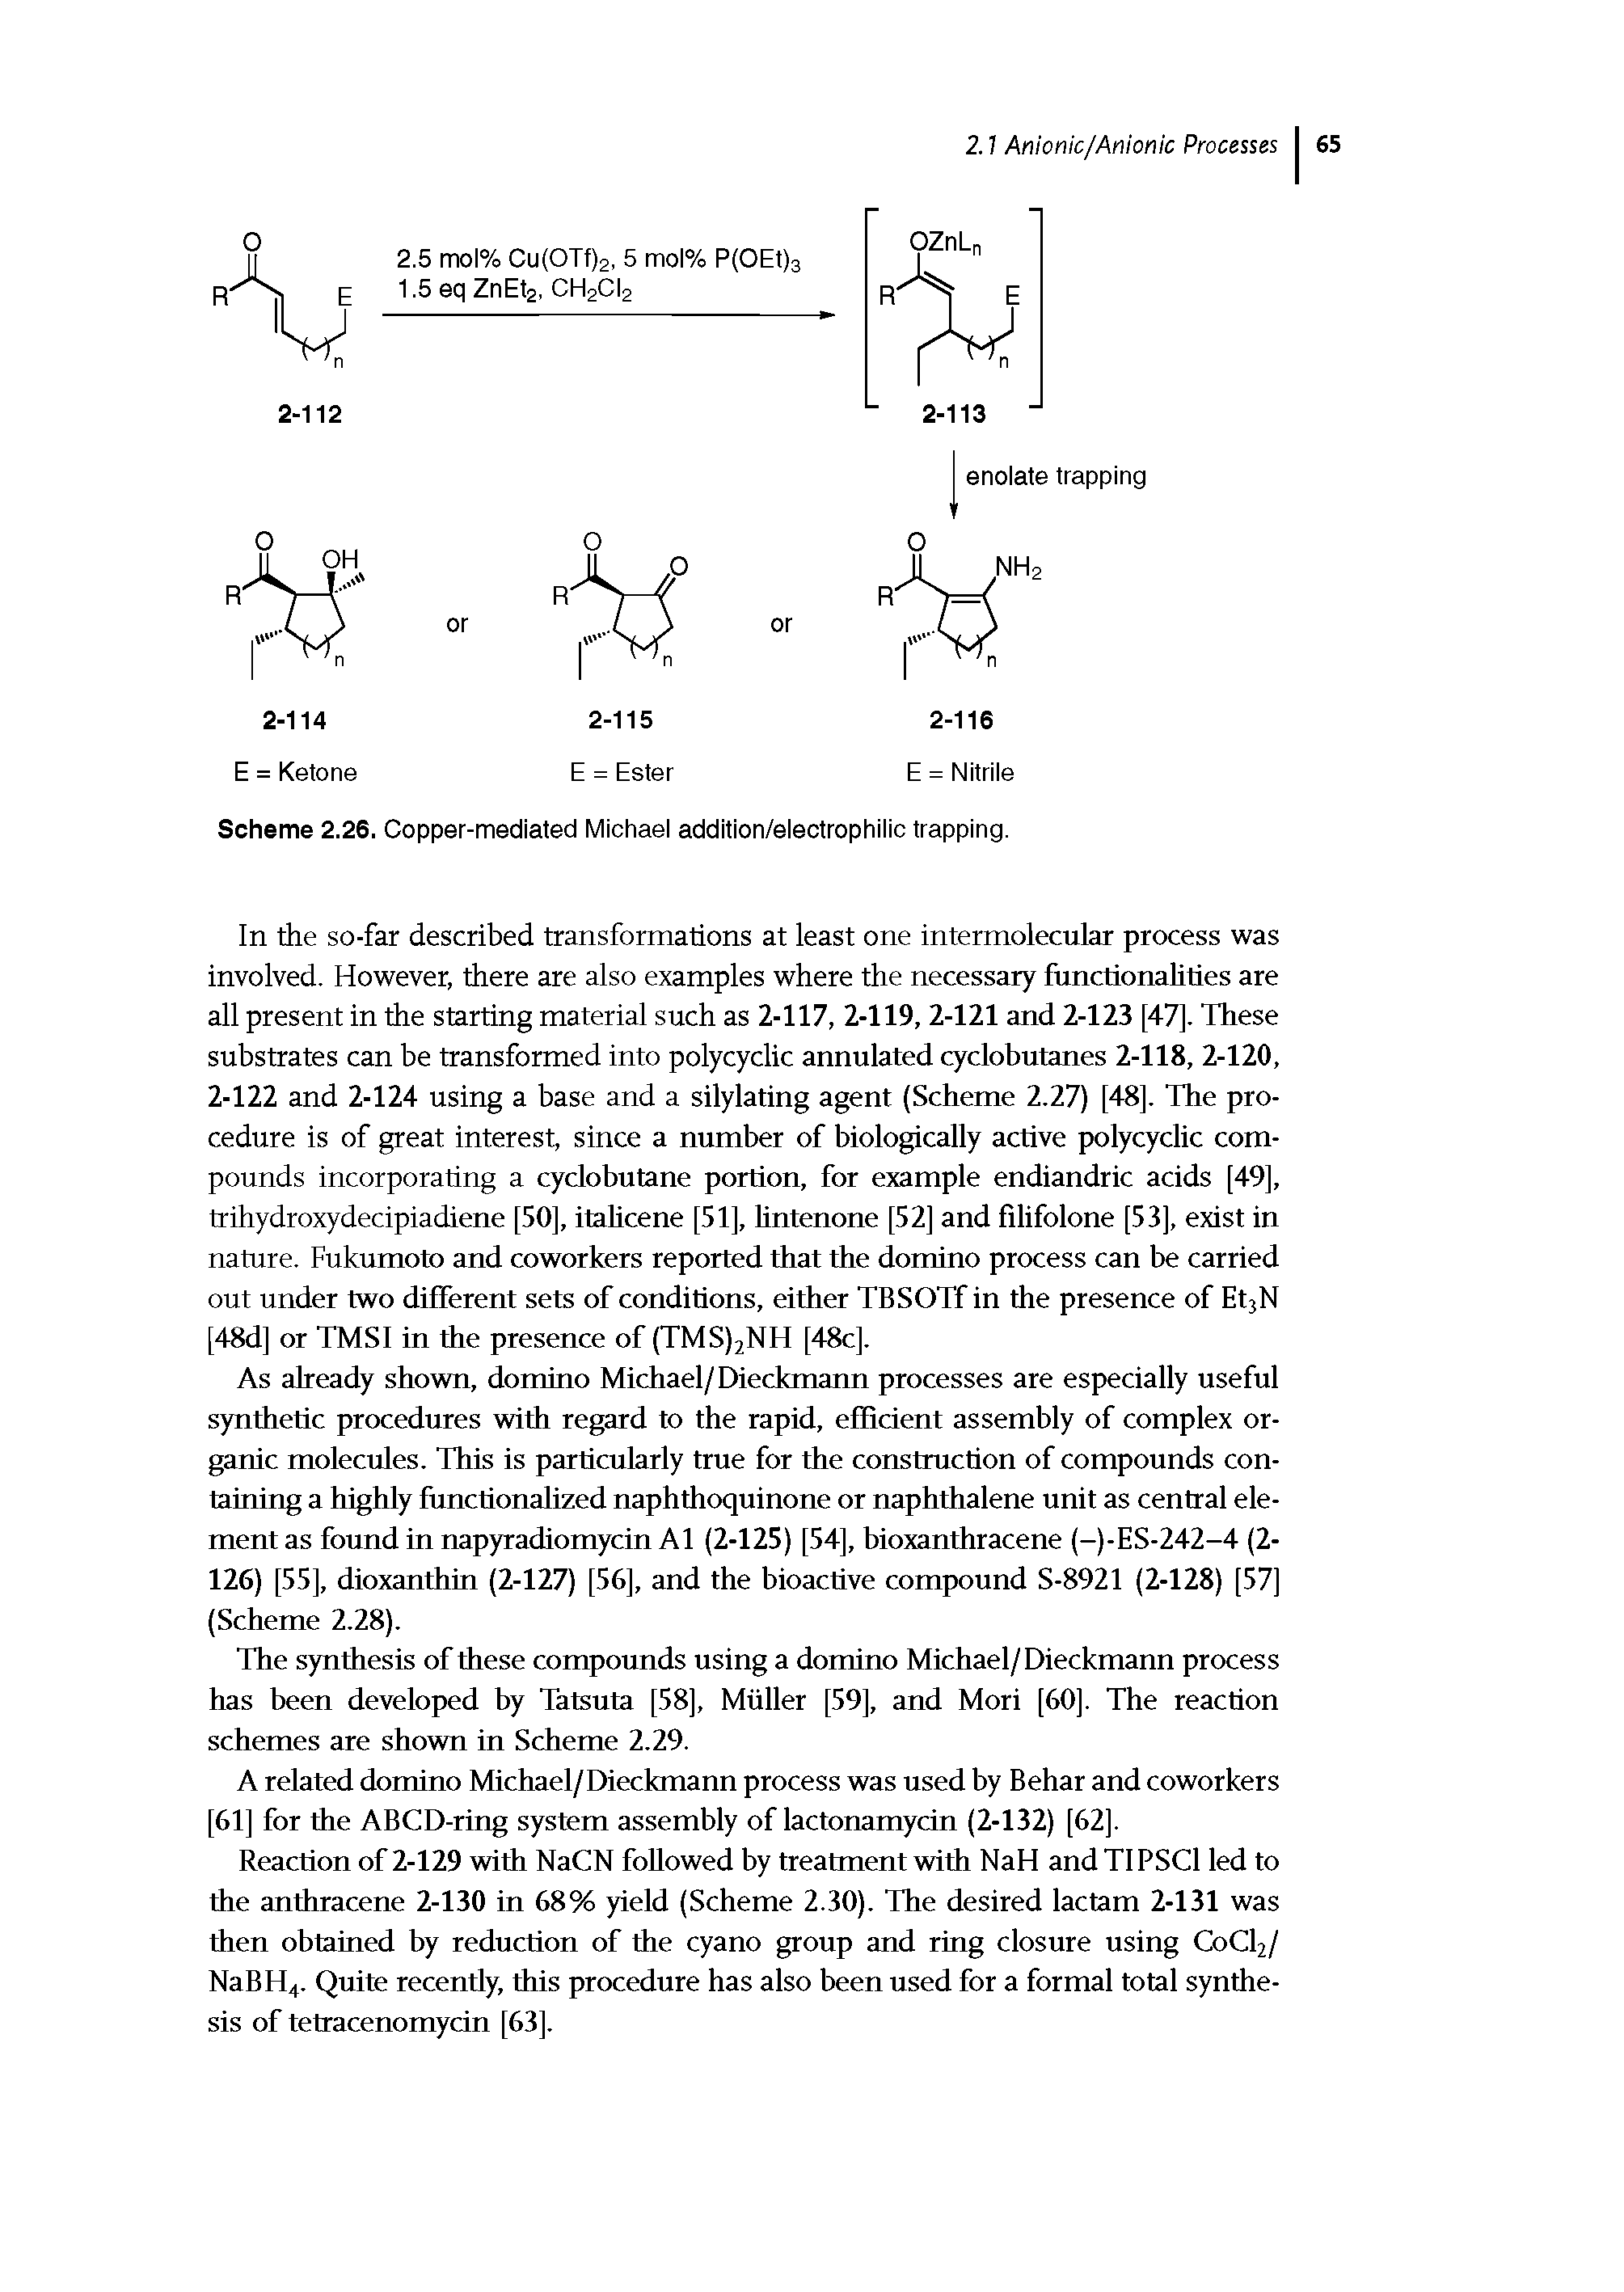 Scheme 2.26. Copper-mediated Michael addition/electrophilic trapping.